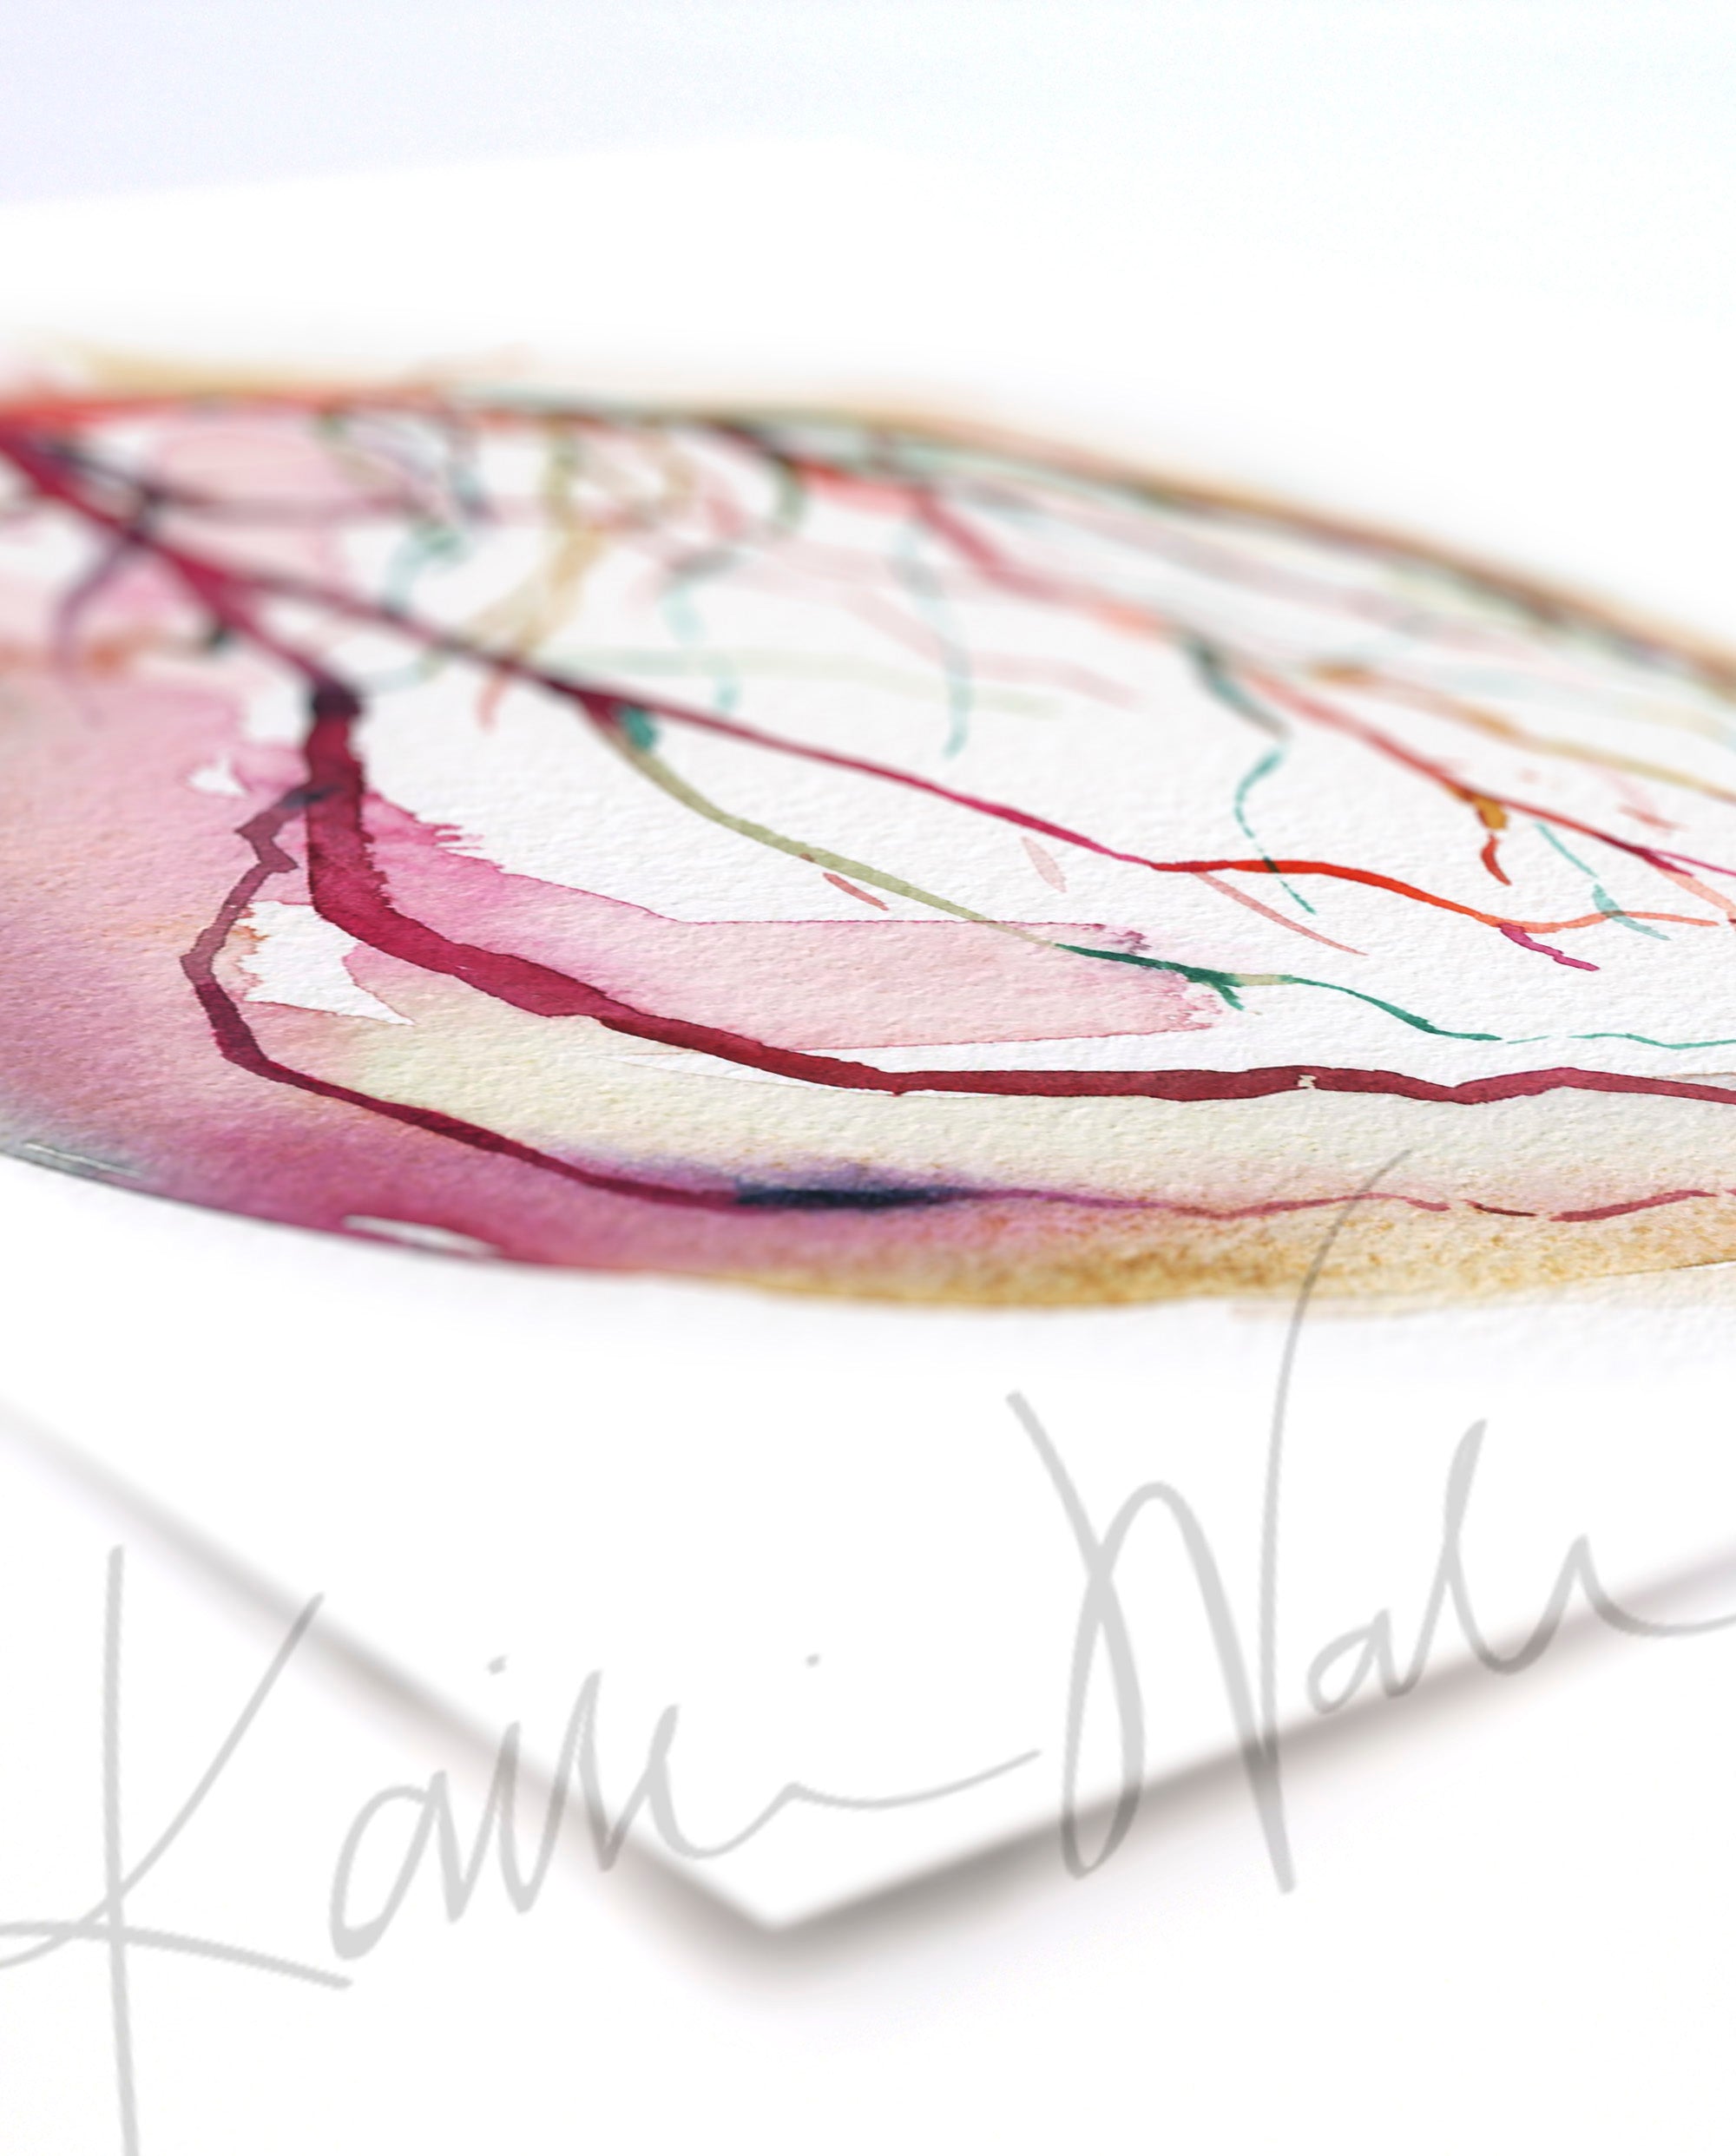  Unframed watercolor painting at an angle showing a coronary angiogram x-ray image in reds, purples, greens, oranges and yellows.